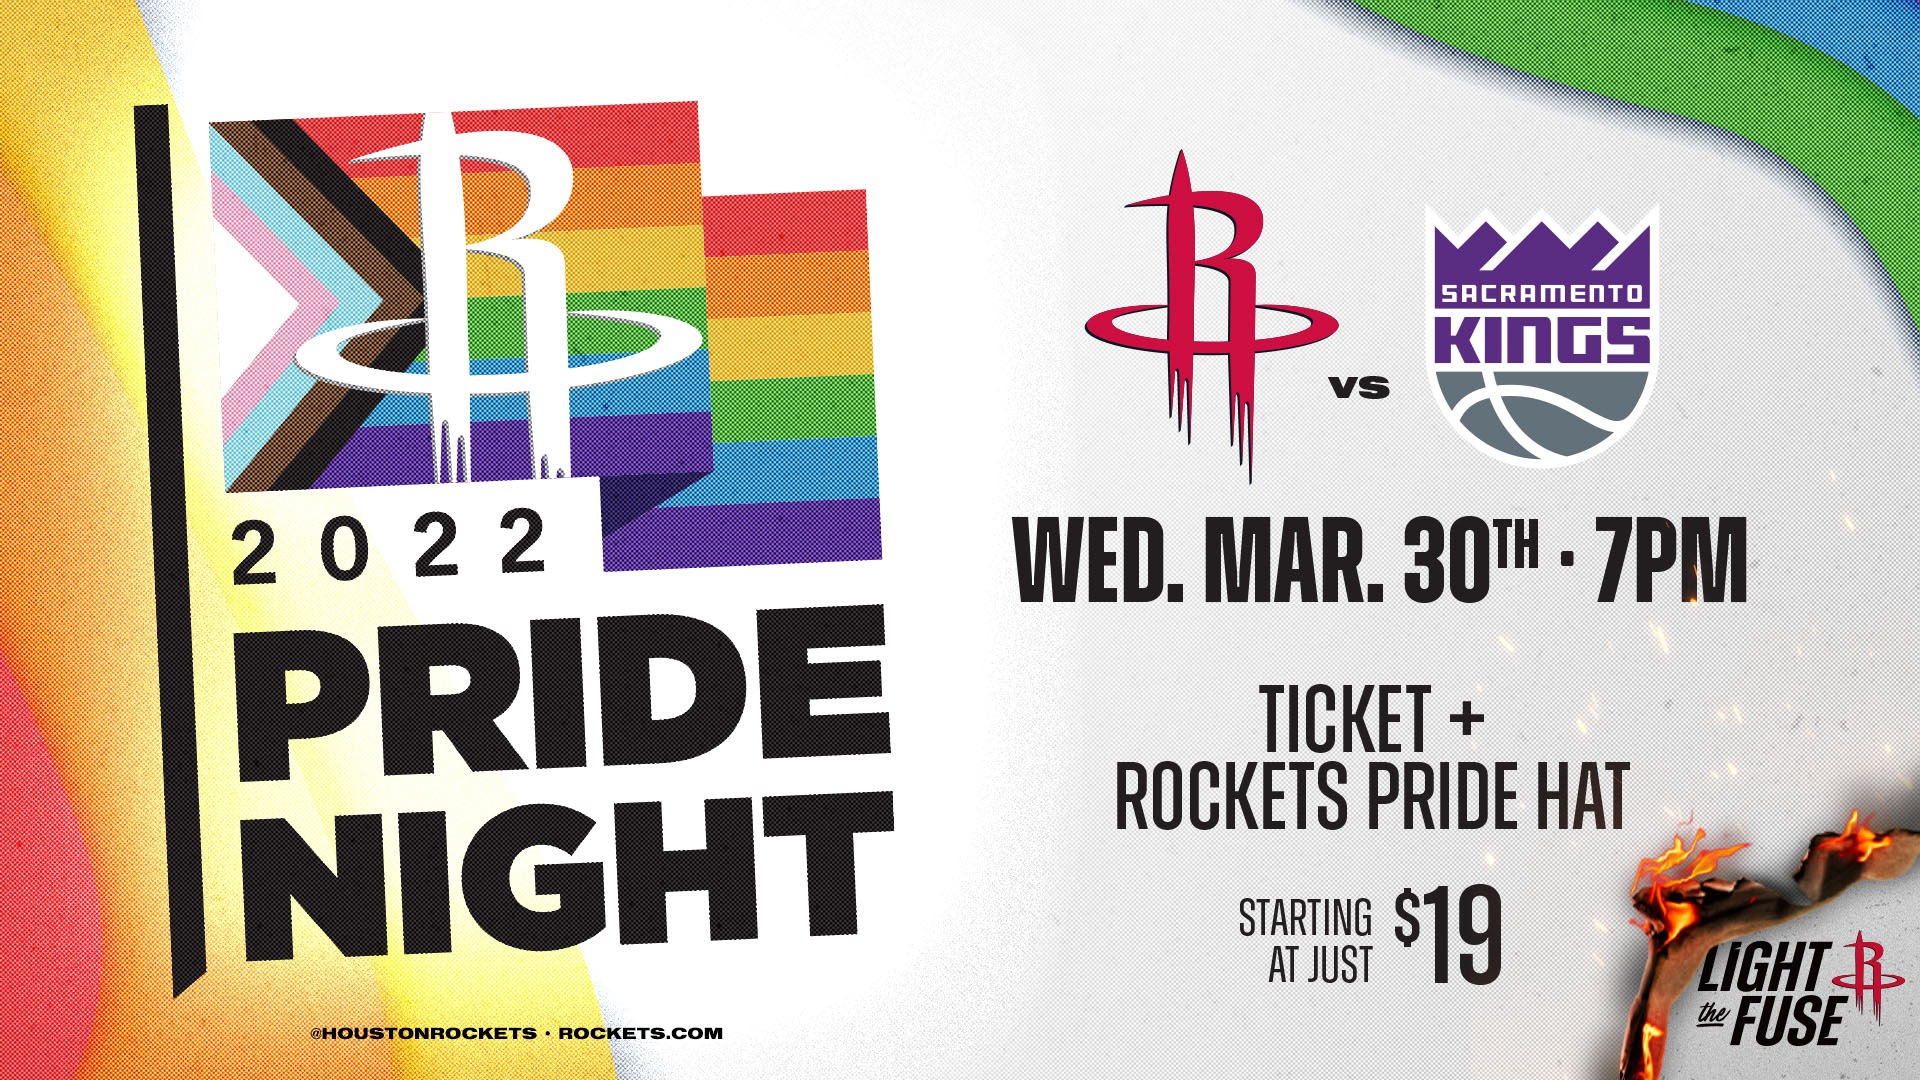 Pride Night with the Houston Dash - Greater Houston LGBT Chamber of Commerce